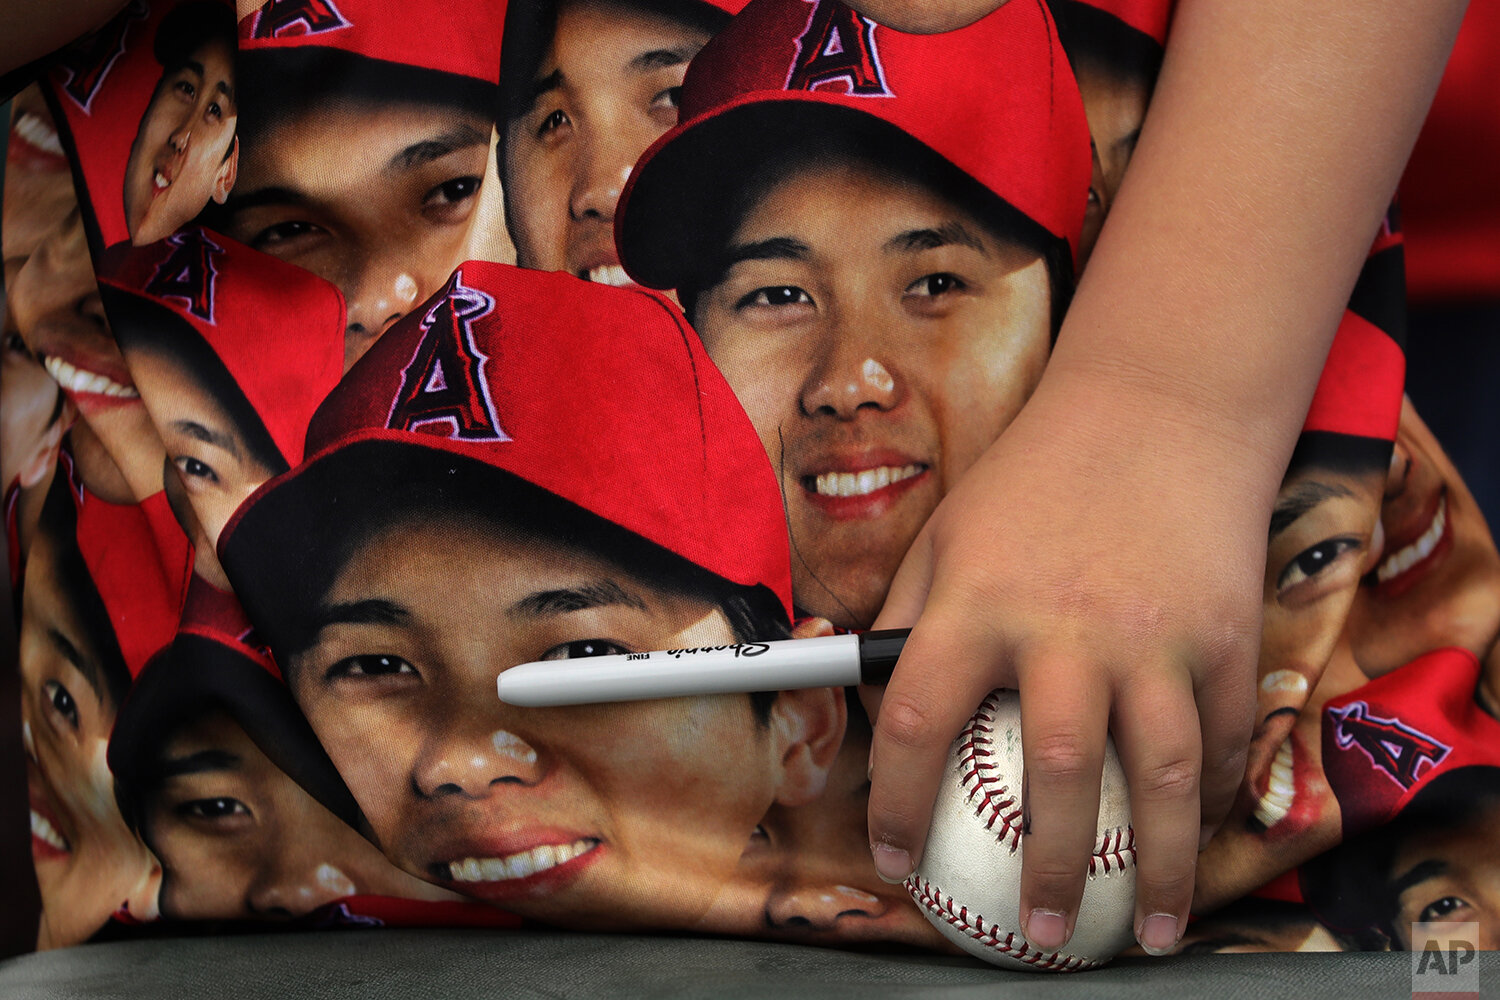  A fan holds a baseball against his shirt covered with images of Los Angeles Angels' Shohei Ohtani as he waits for autographs before a spring training baseball game between the Los Angeles Angels and the Texas Rangers Friday, Feb. 28, 2020, in Tempe,